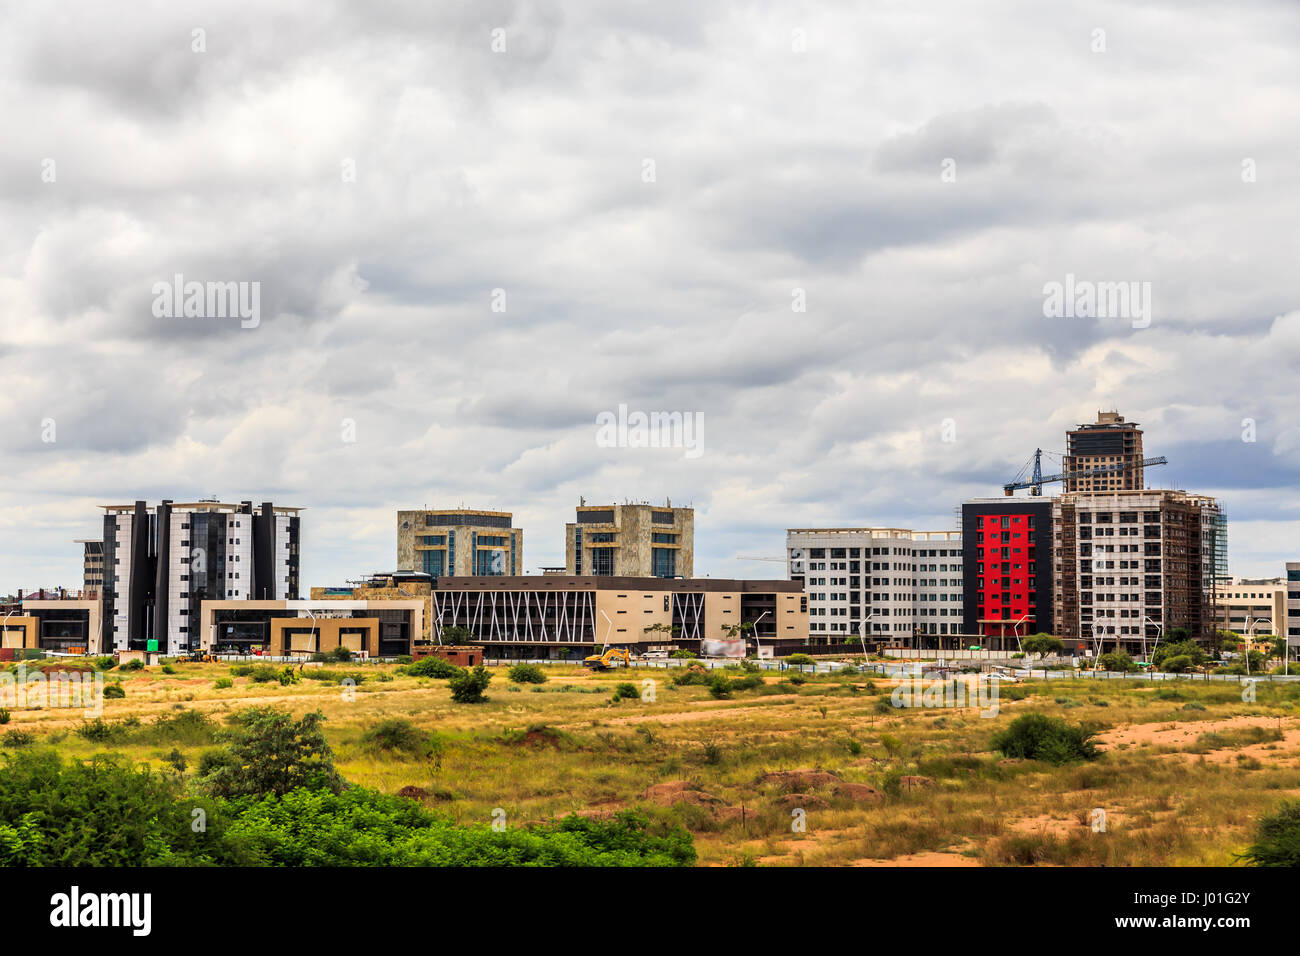 Rapidly developing central business district, Gaborone, Botswana, 2017 Stock Photo